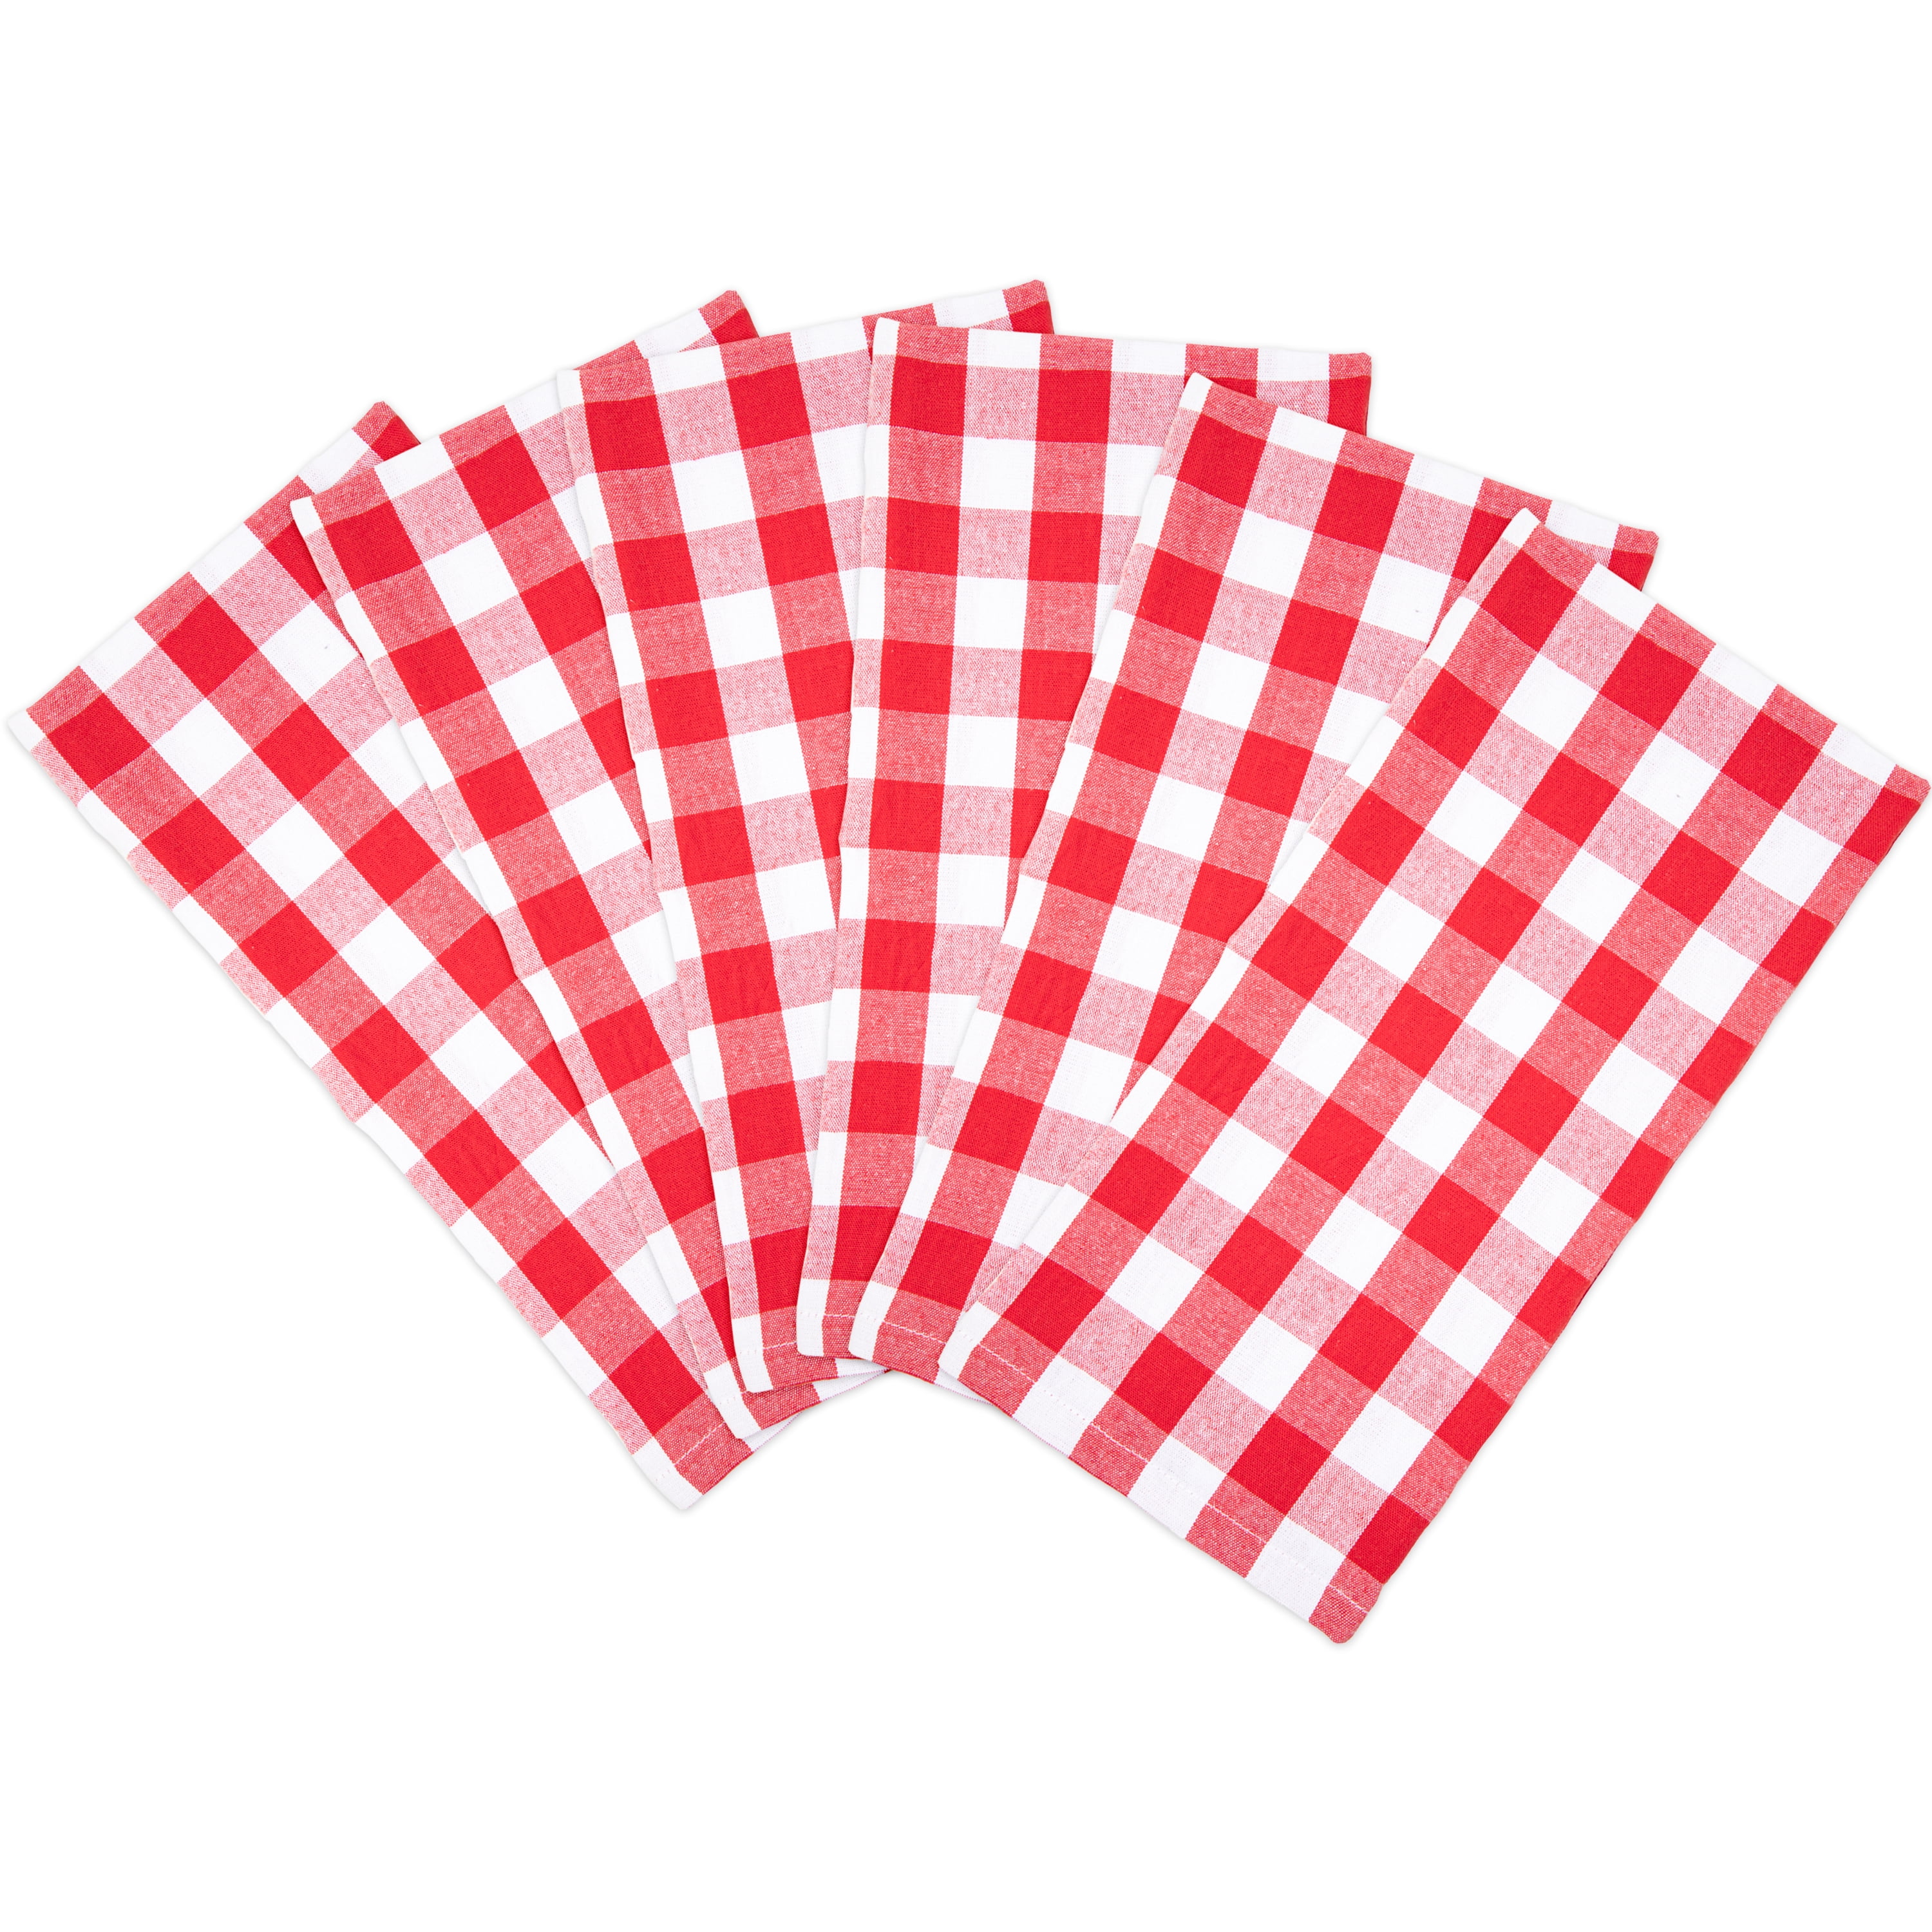 Buffalo Plaid Kitchen Towel Set - 4 Pack 20 x 30 Inch Heavy Duty Dish  Towels - Pink and White Oversized Buffalo Check Towels with Hanging Loops -  100%